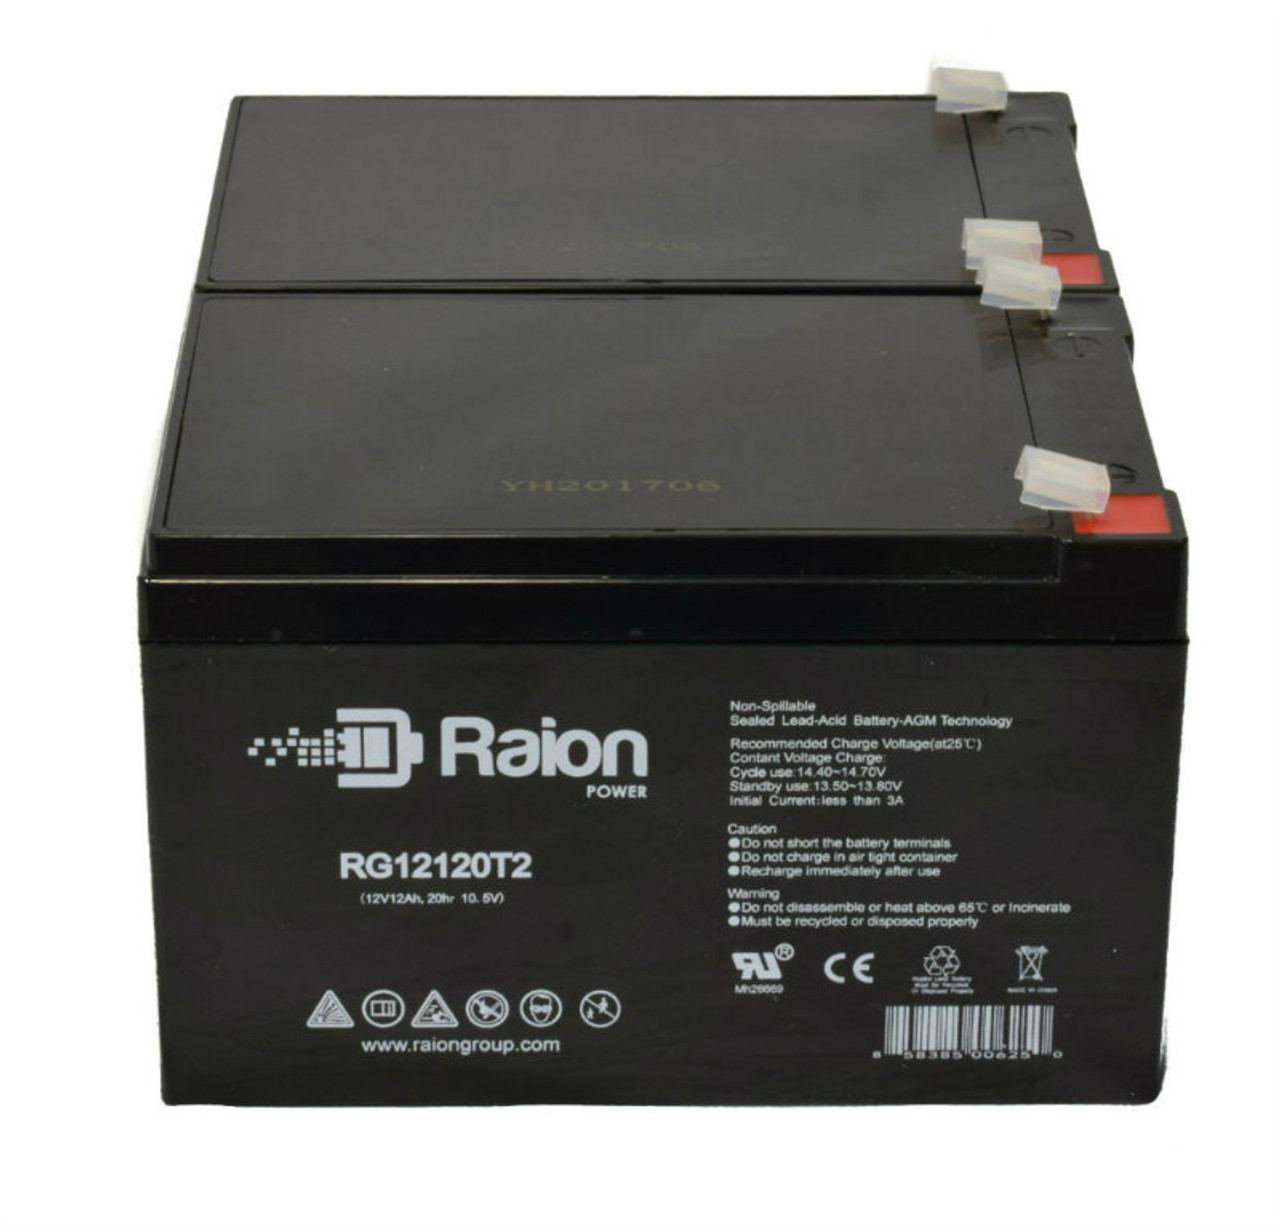 Raion Power RG12120T2 Replacement Battery Set for Invacare Zoom 220 Mobility Scooter - 2 Pack